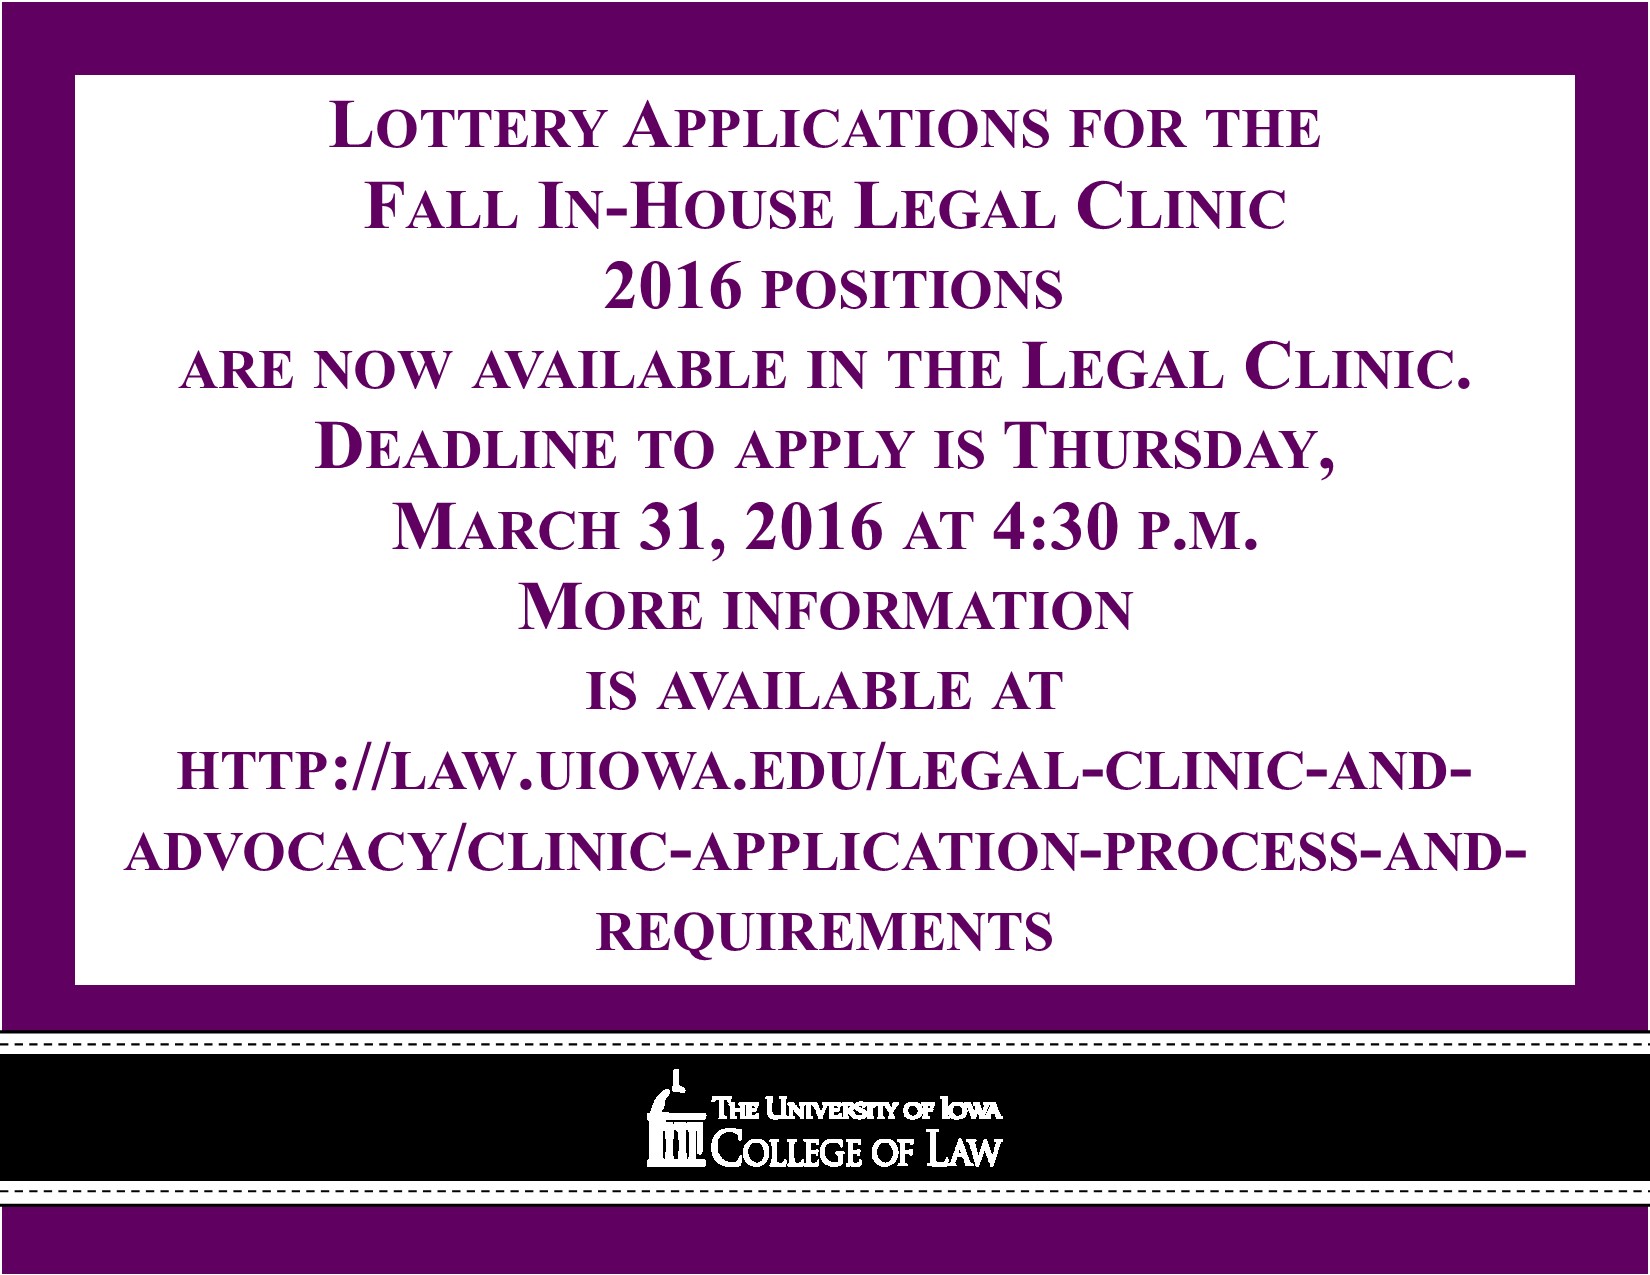 Lottery Applications for the Fall In-House Legal Clinic are now available in the Legal Clinic.  Deadline to apply is Thursday, March 31 at 4:30 p.m.  More information is available at law.uiowa.edu/legal-clinic-and-advocacy/clinic-application-process-and-requirements